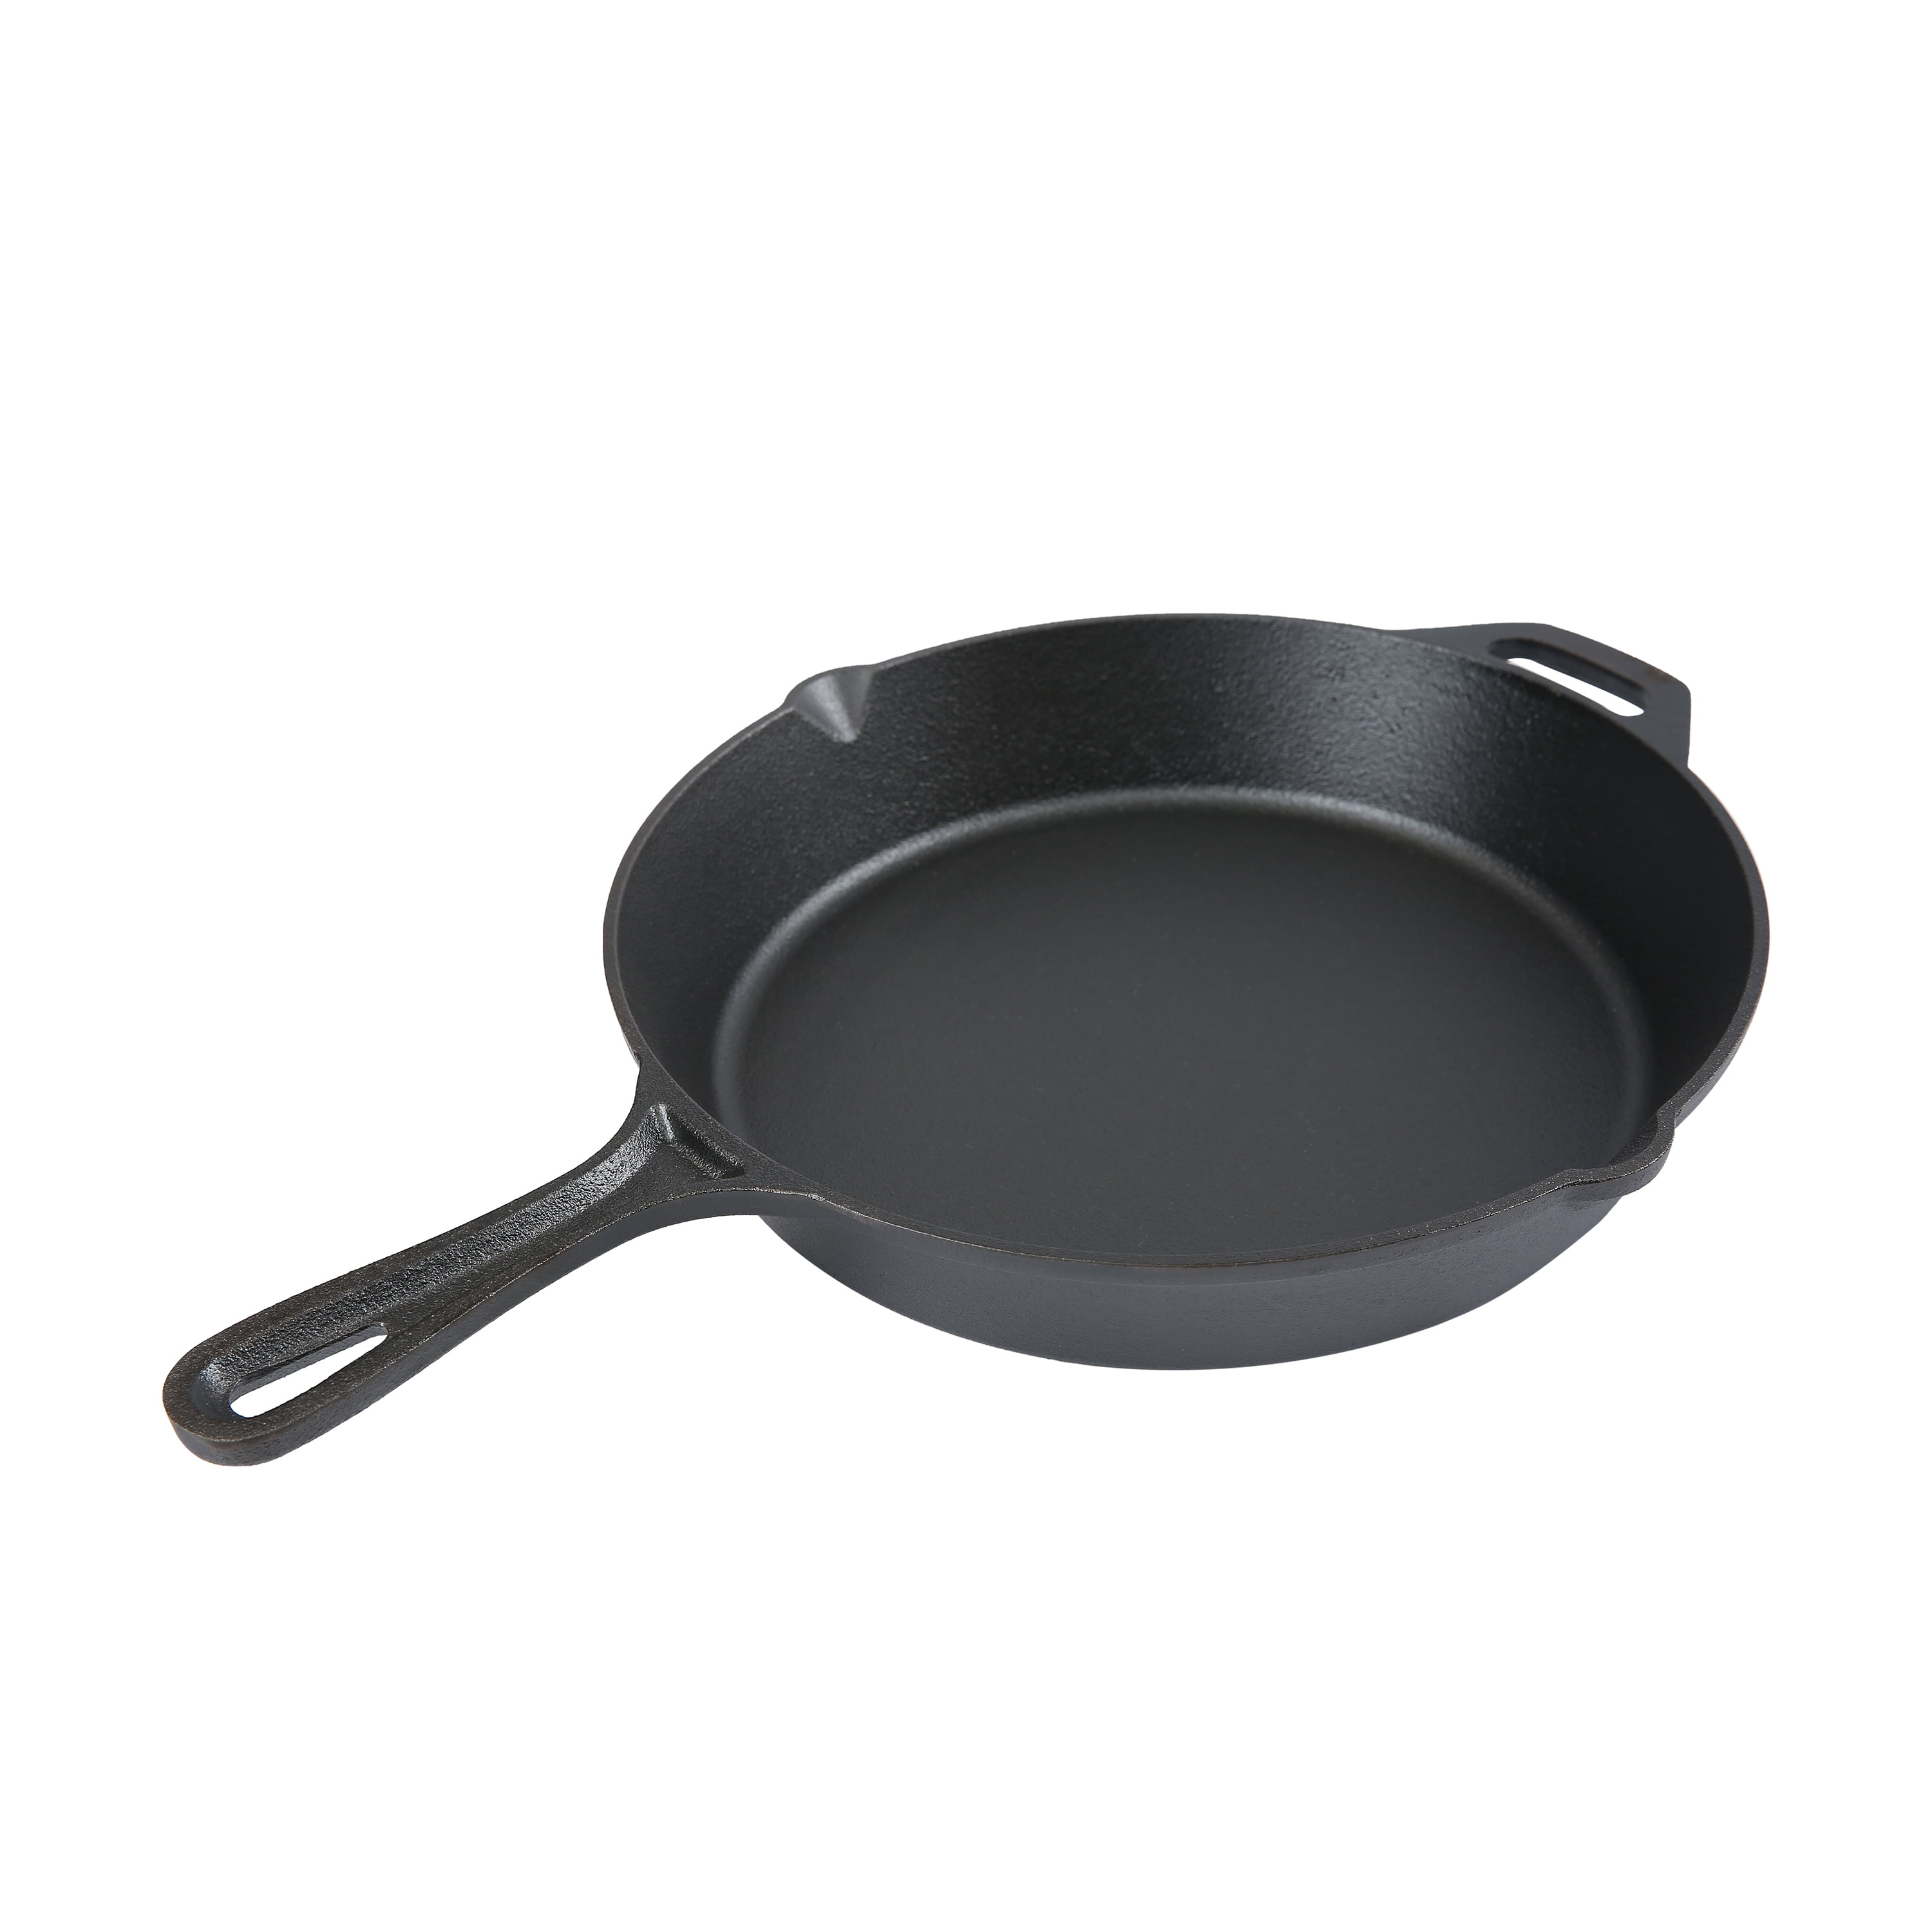 GRIZZLY 12 Cast Iron Skillet